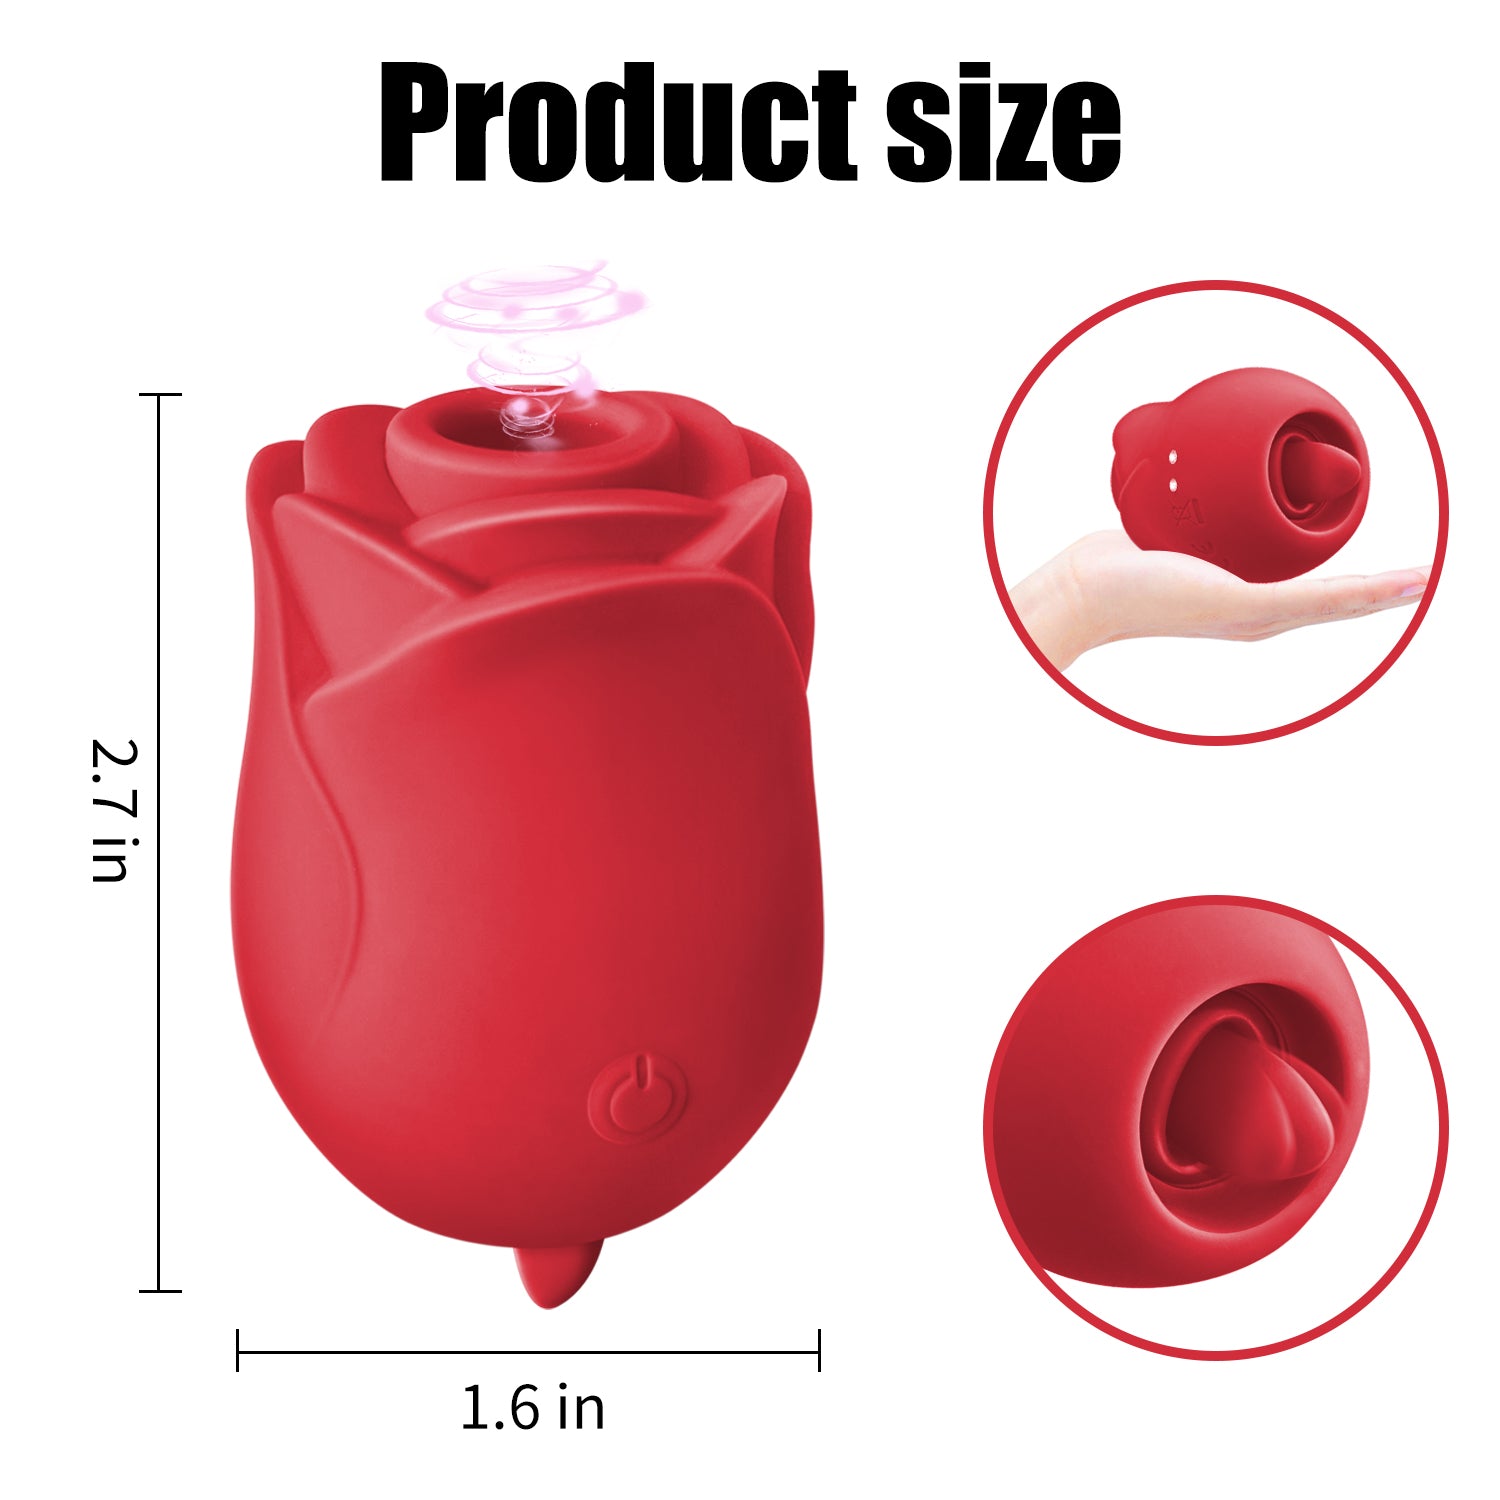 Rose Sex Toy size